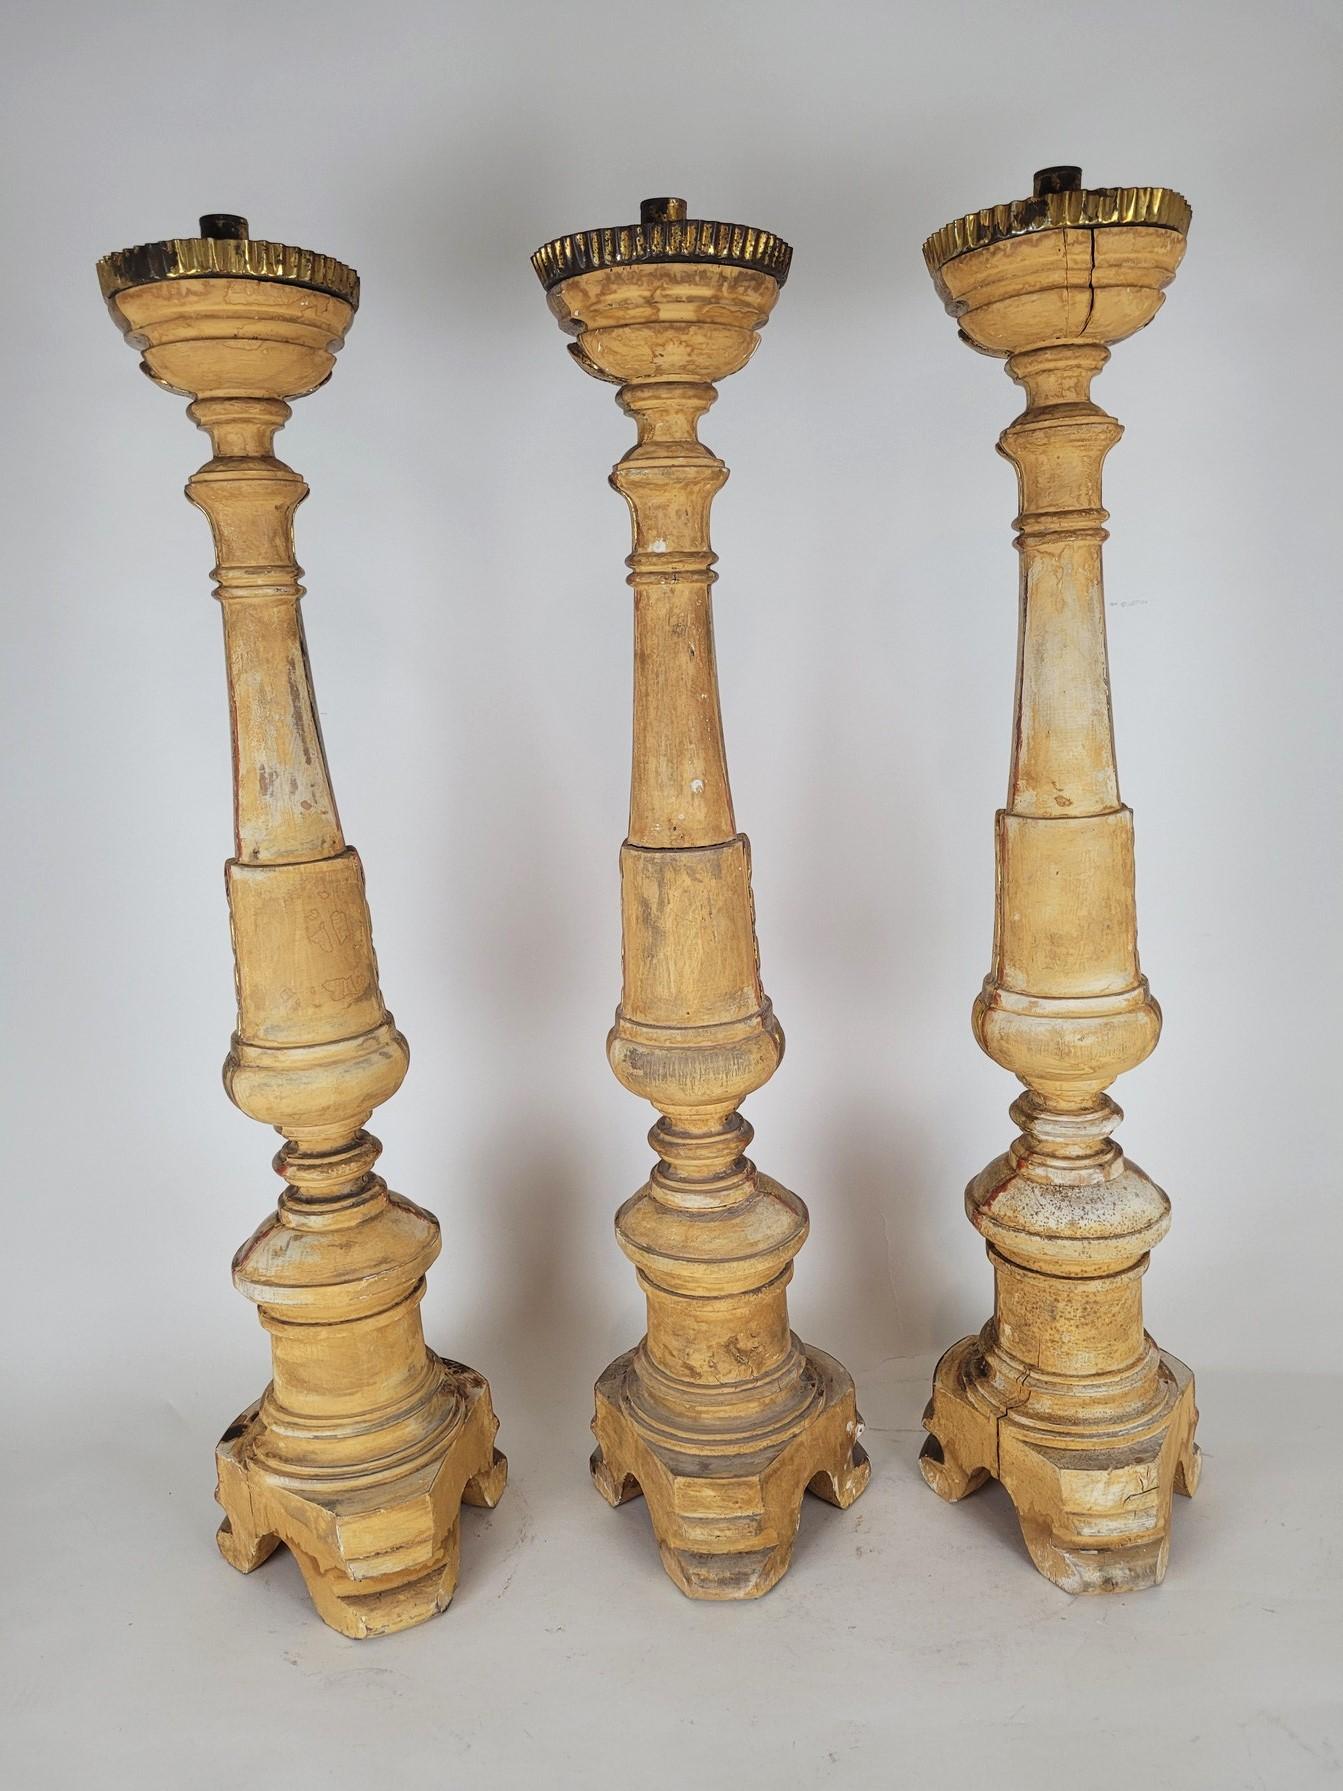 Suite Of 3 Large Candlesticks In Golden Wood, Early 19th Century For Sale 7